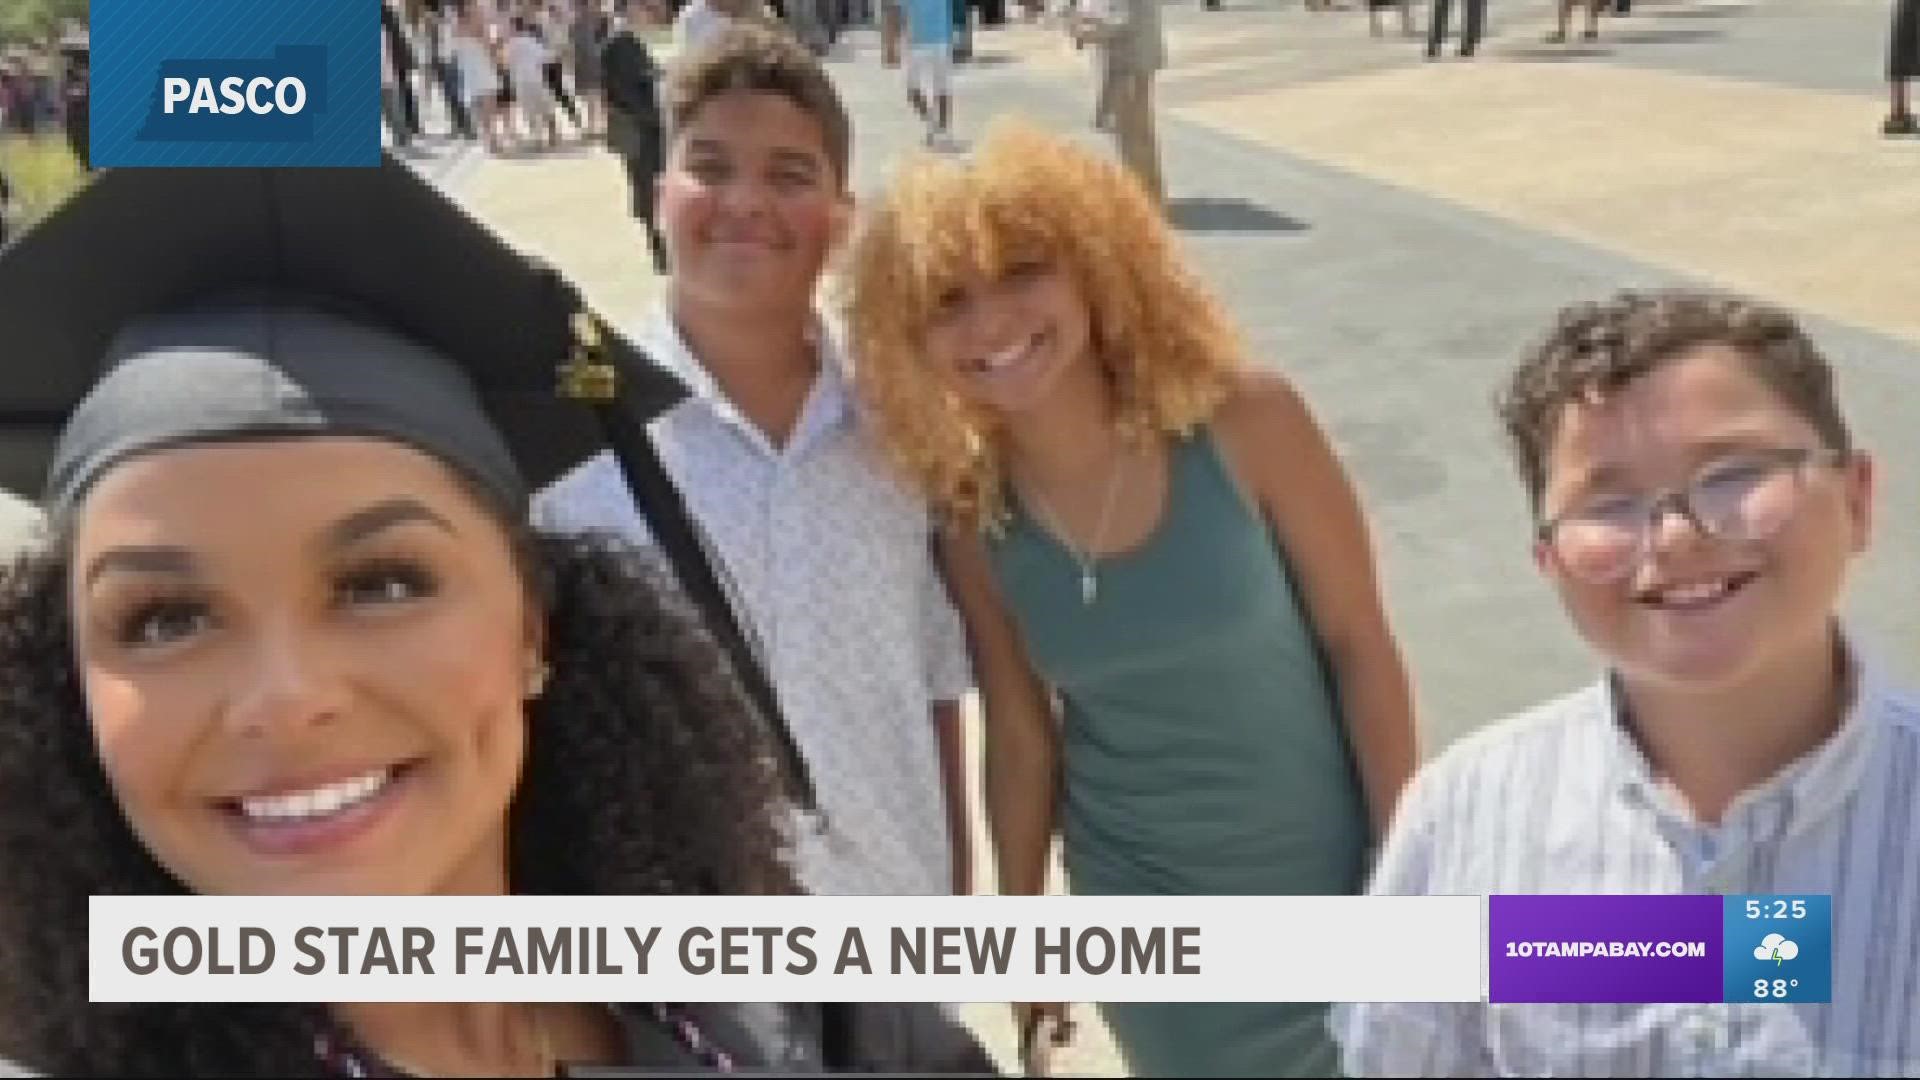 Four siblings moved into their new home after their dad paid the ultimate sacrifice.